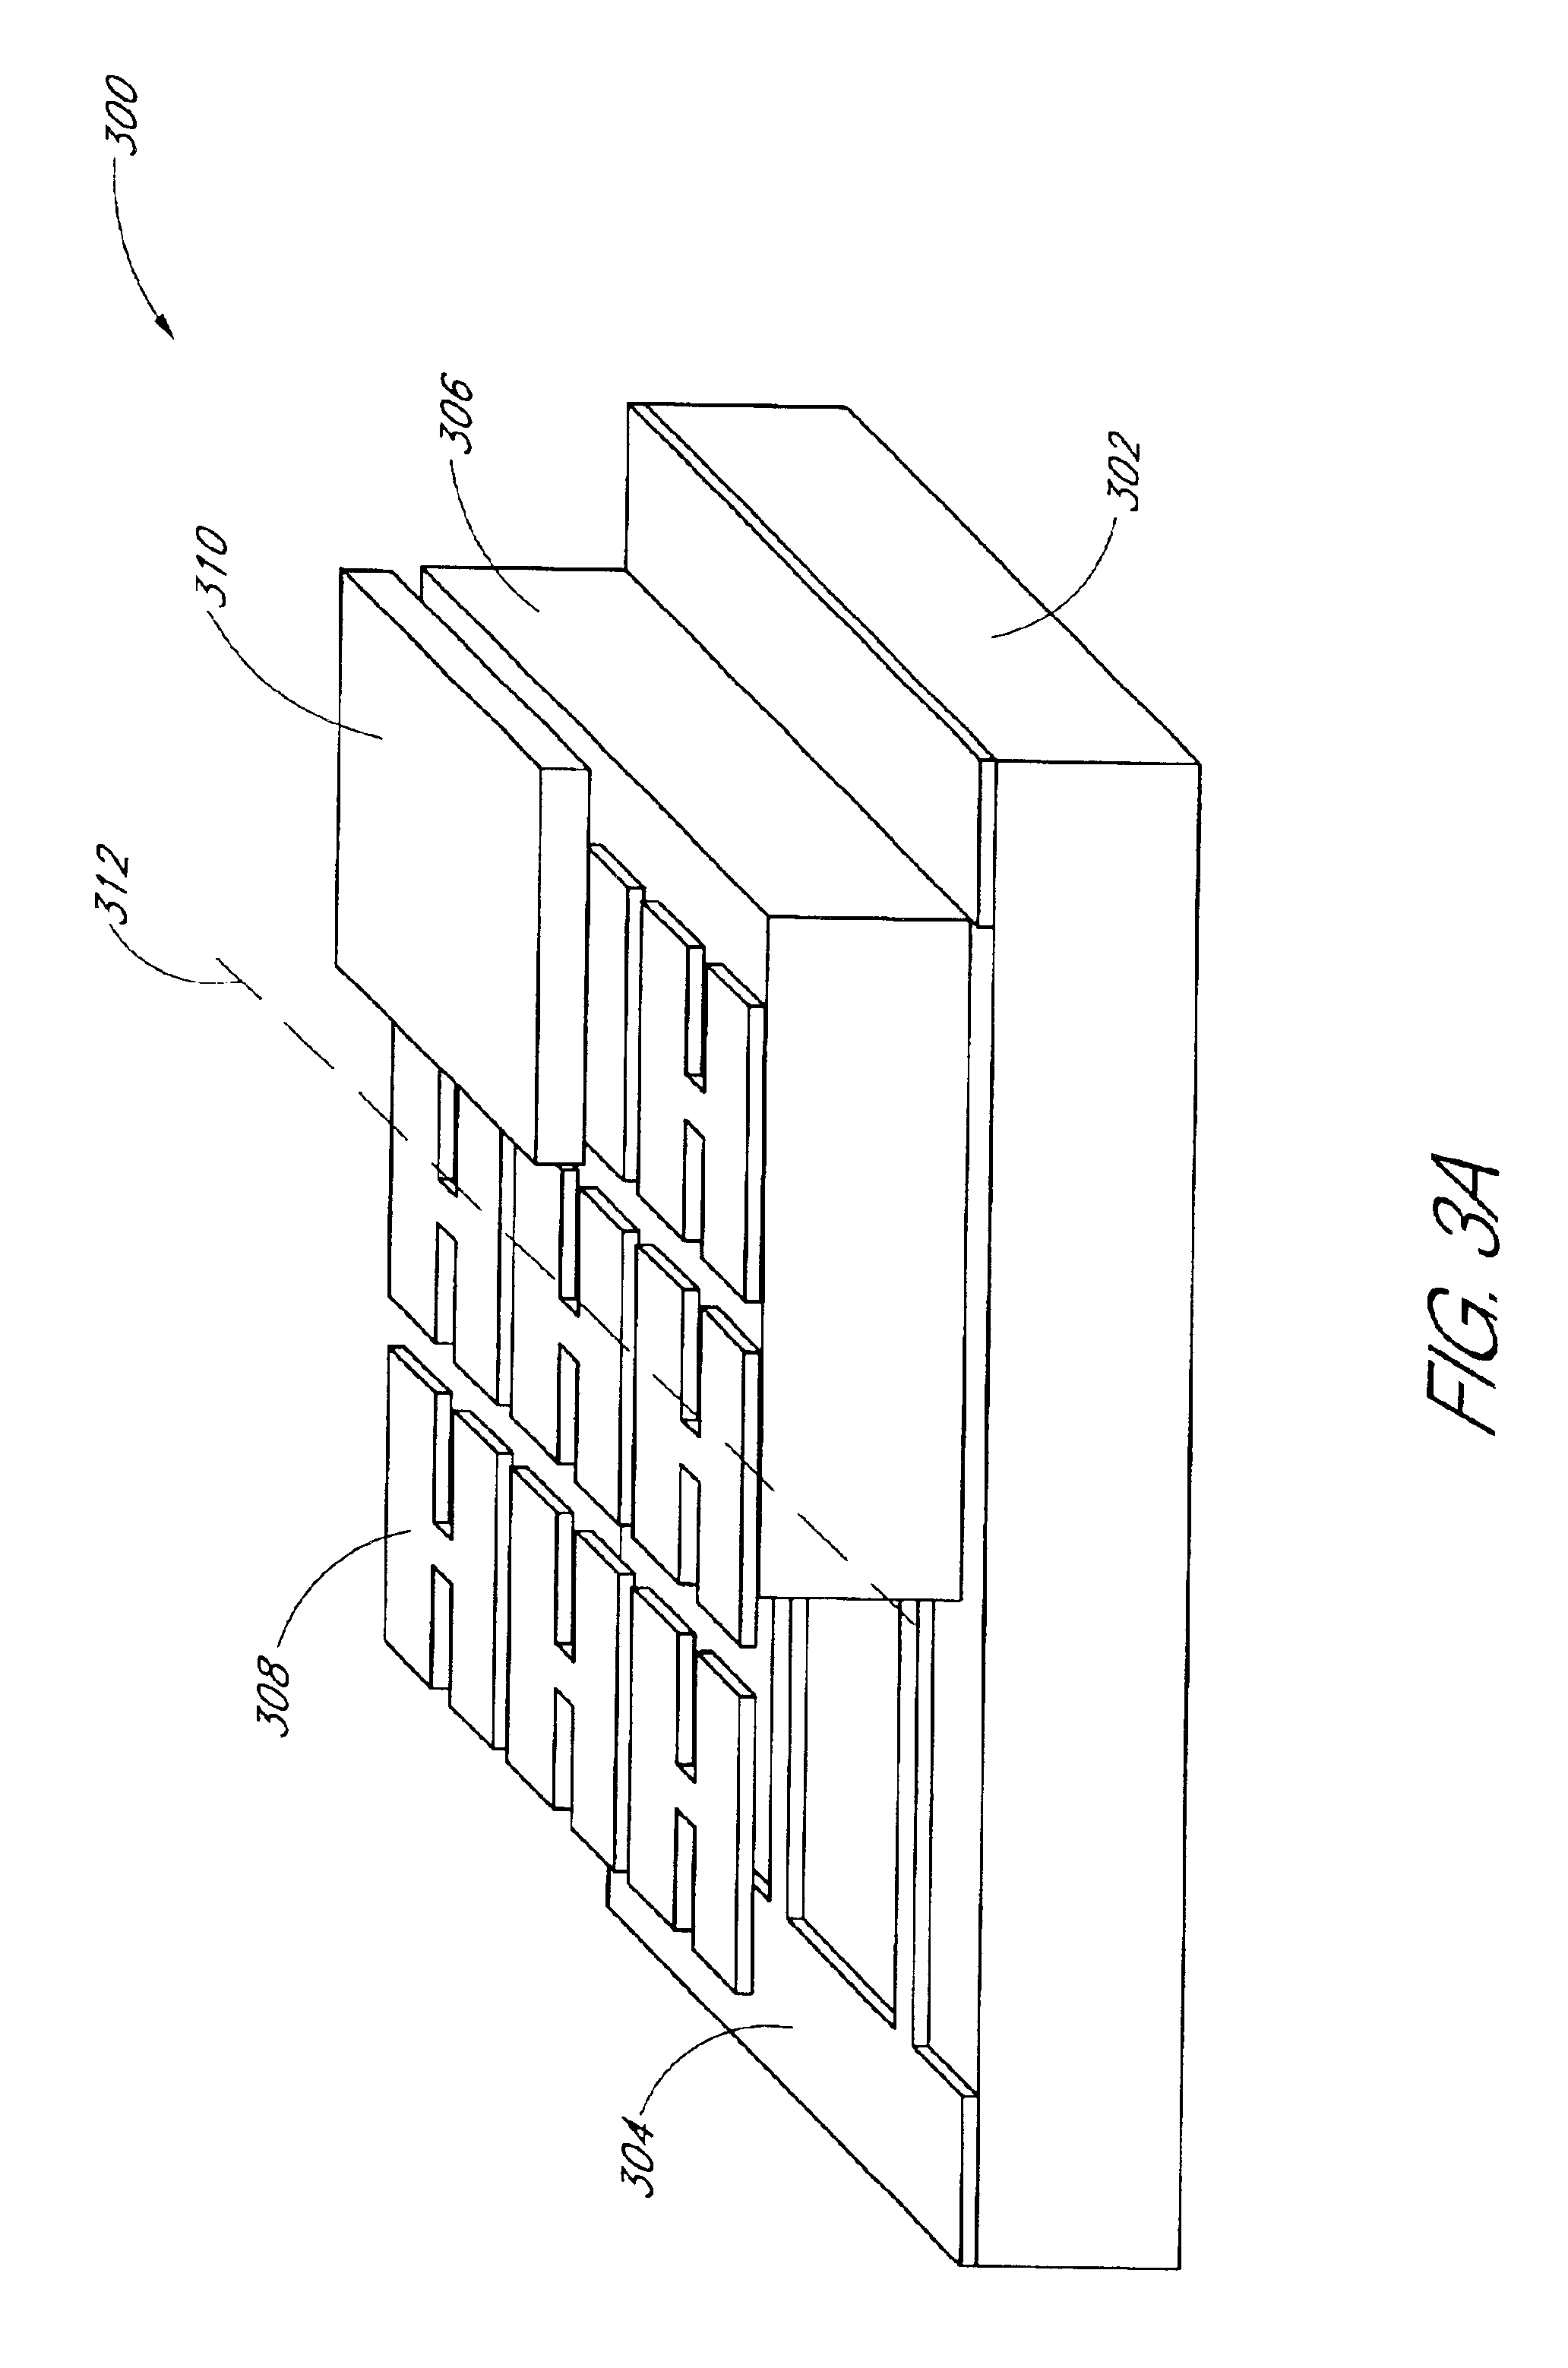 Systems and methods for optical actuation of microfluidics based on opto-electrowetting